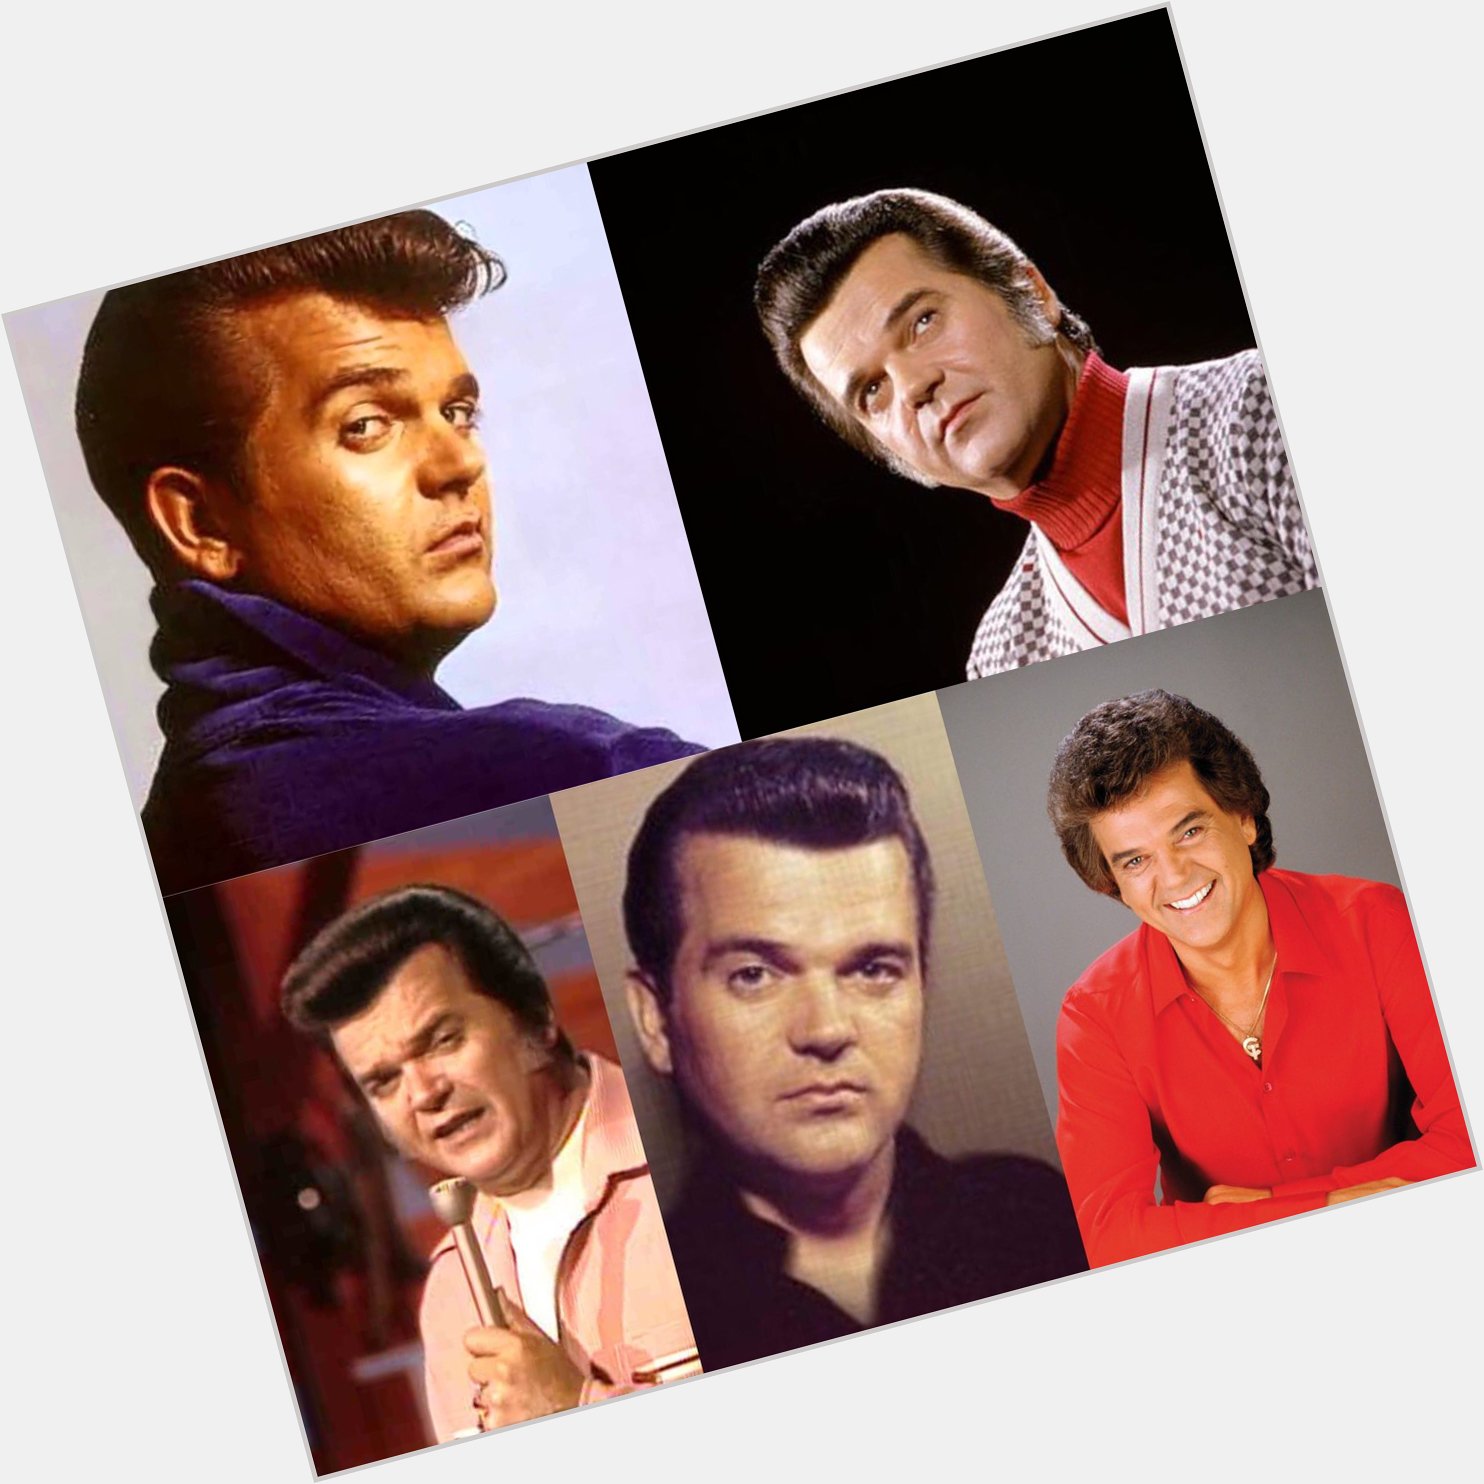 Happy 85 birthday to Conway Twitty up in heaven. May he Rest In Peace.     